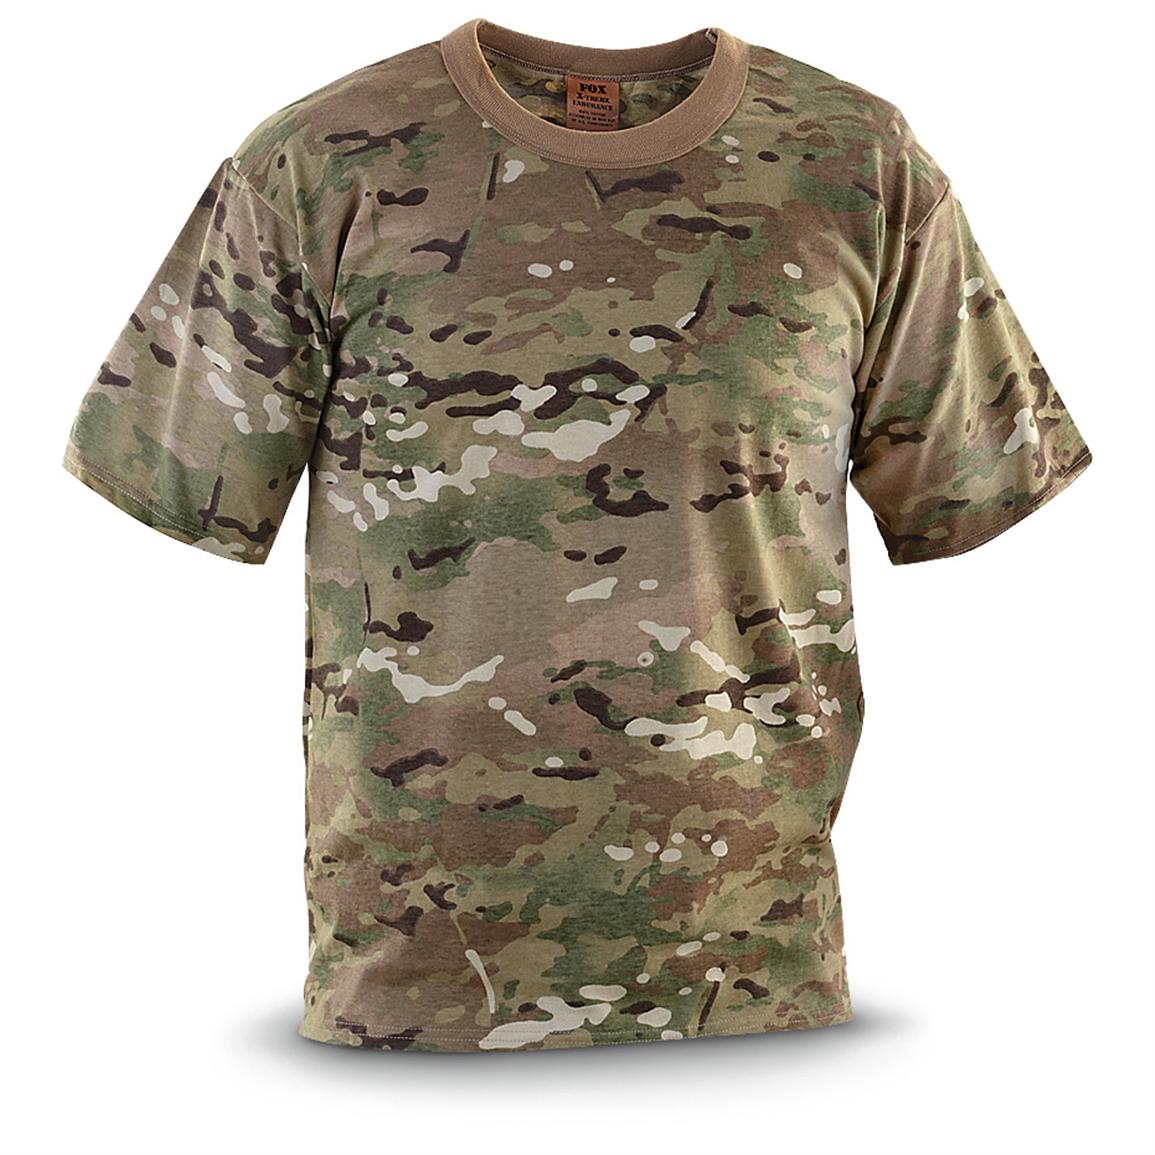 MultiCam® T-shirt - 302523, Military T-Shirts at Sportsman's Guide